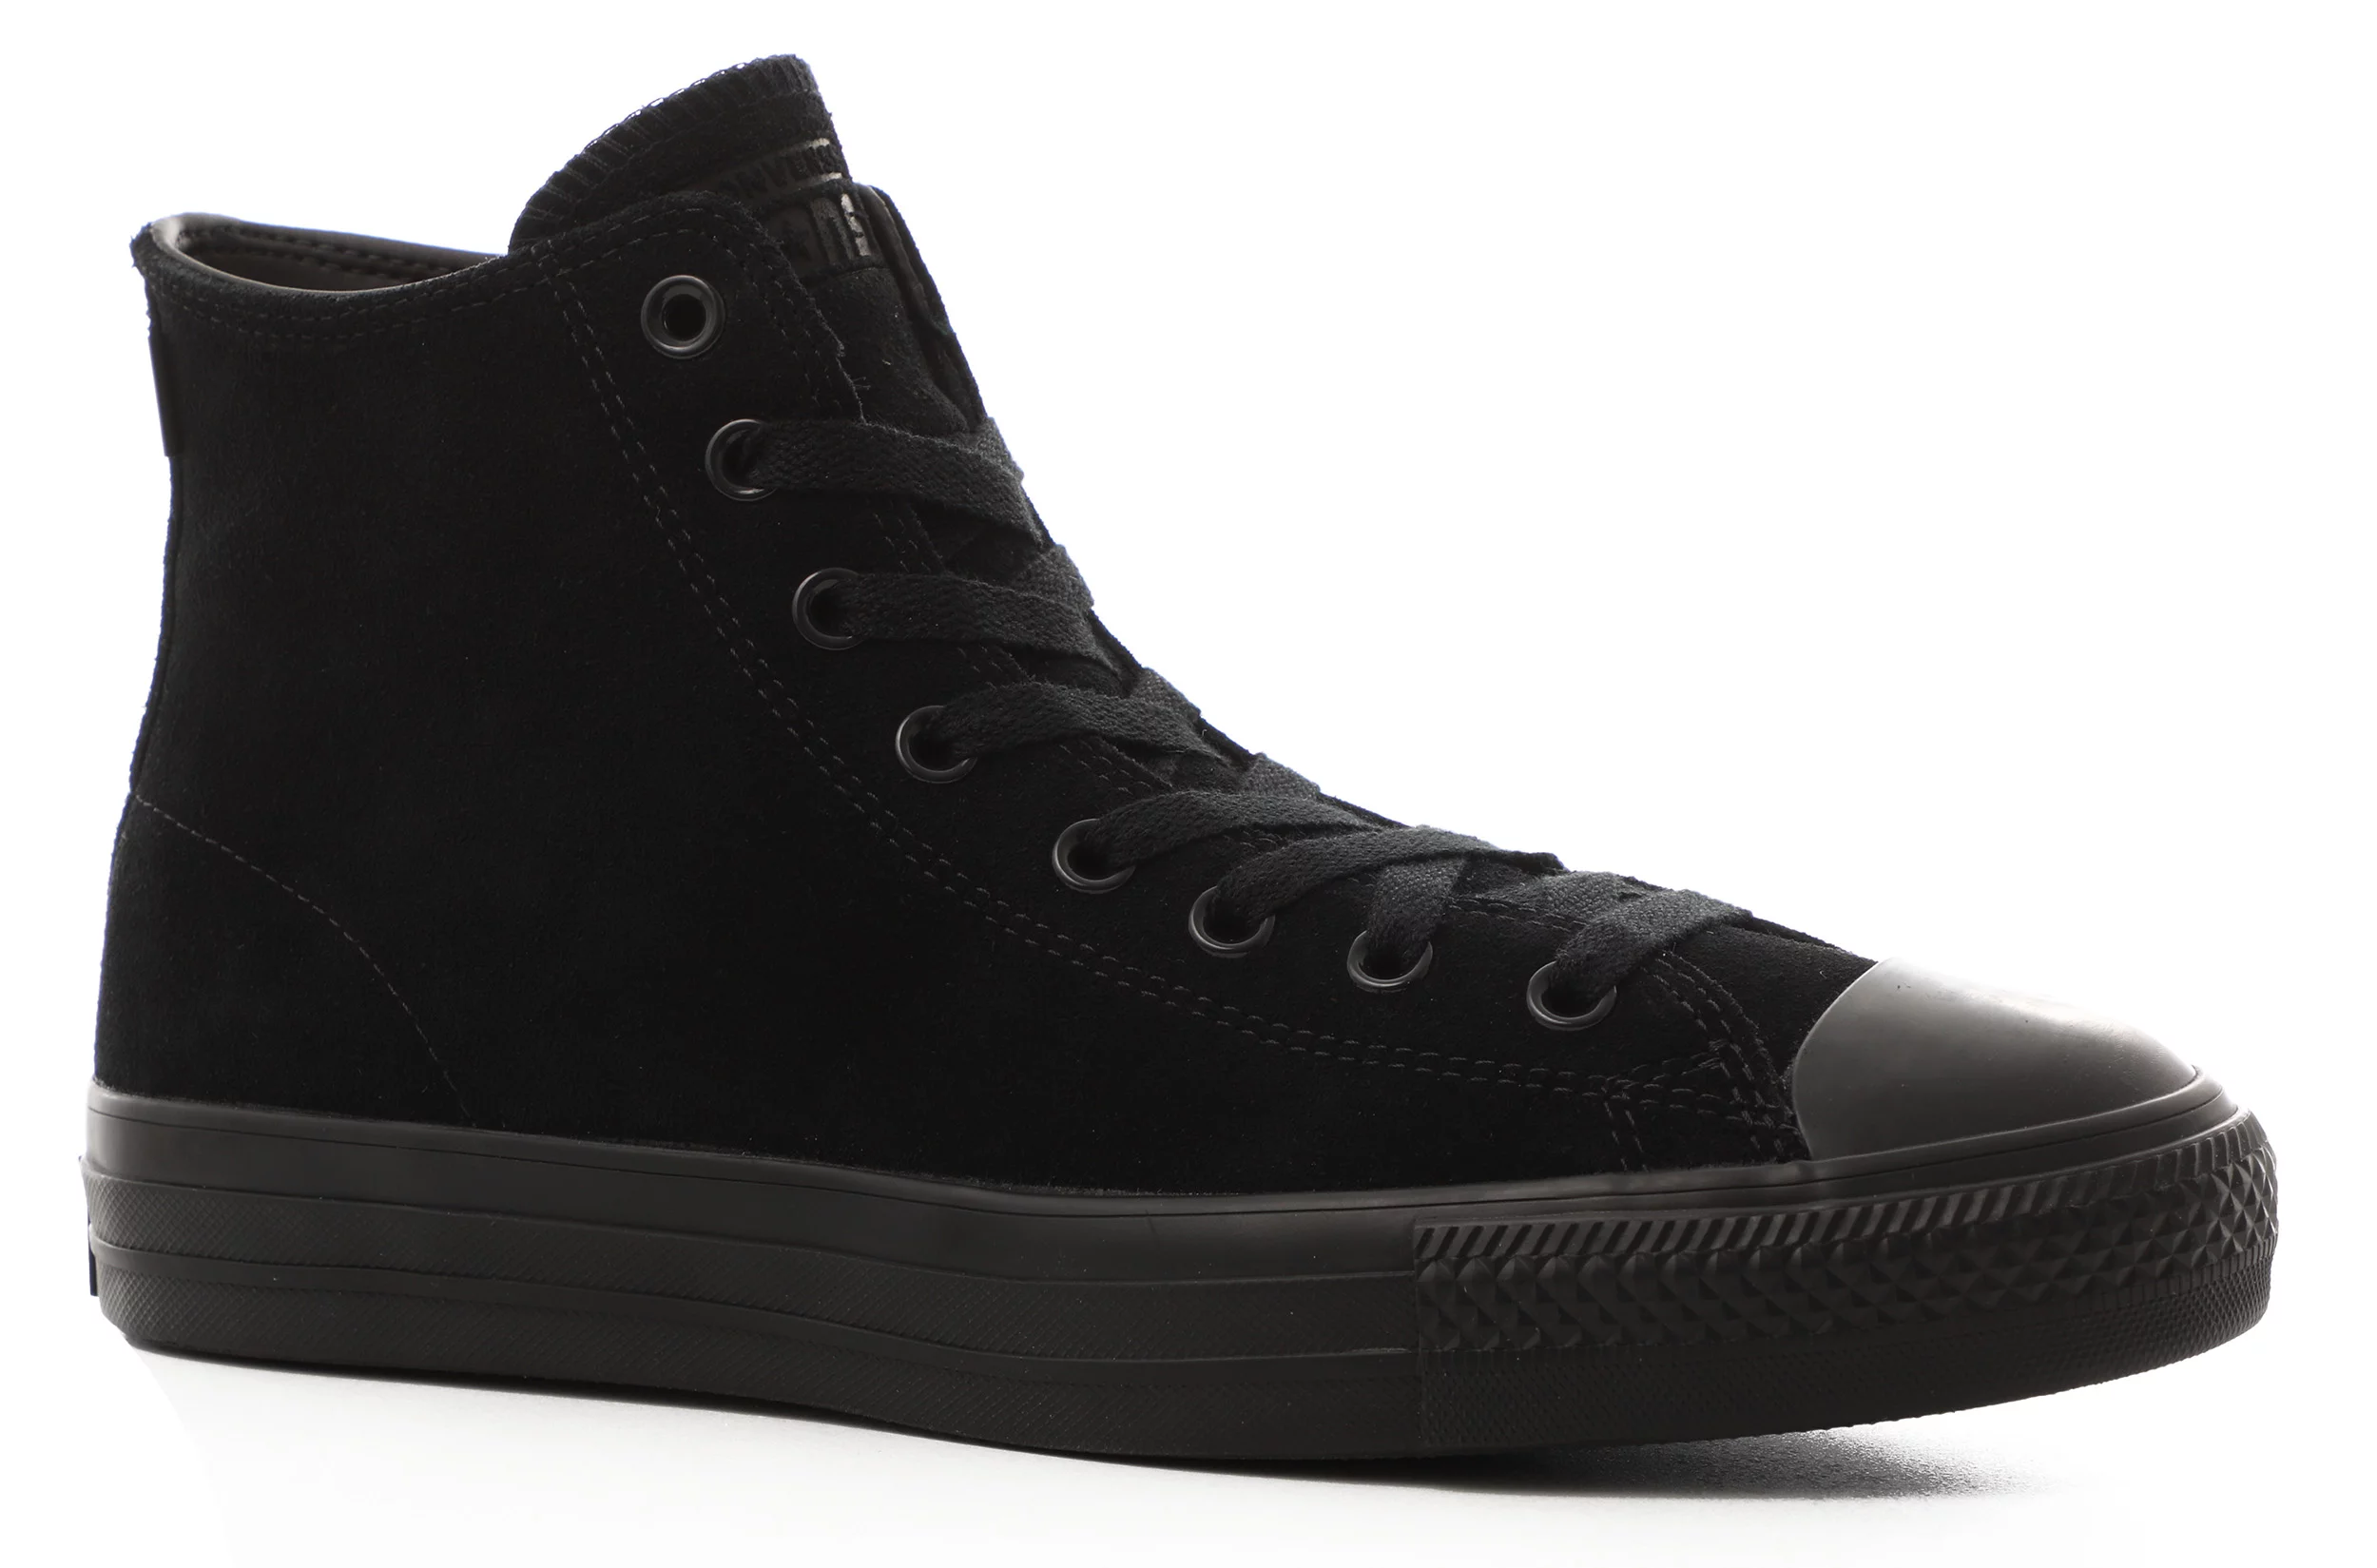 Converse Chuck Taylor All Star Pro High Skate Shoes - (suede)  black/black/black - Free Shipping | Tactics